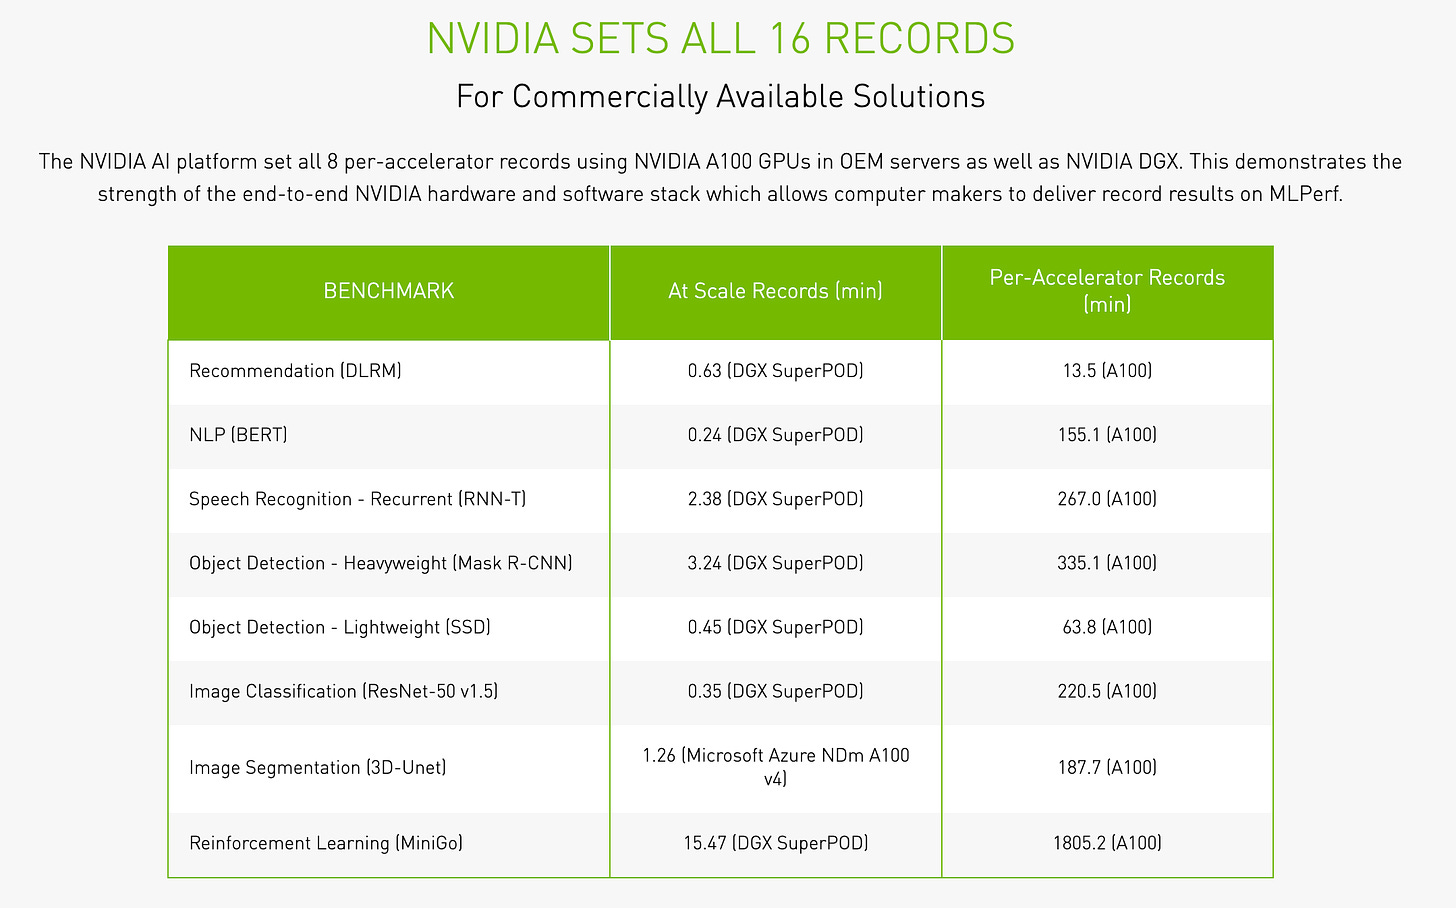 MLPerf Benchmarks - Source: Nvidia